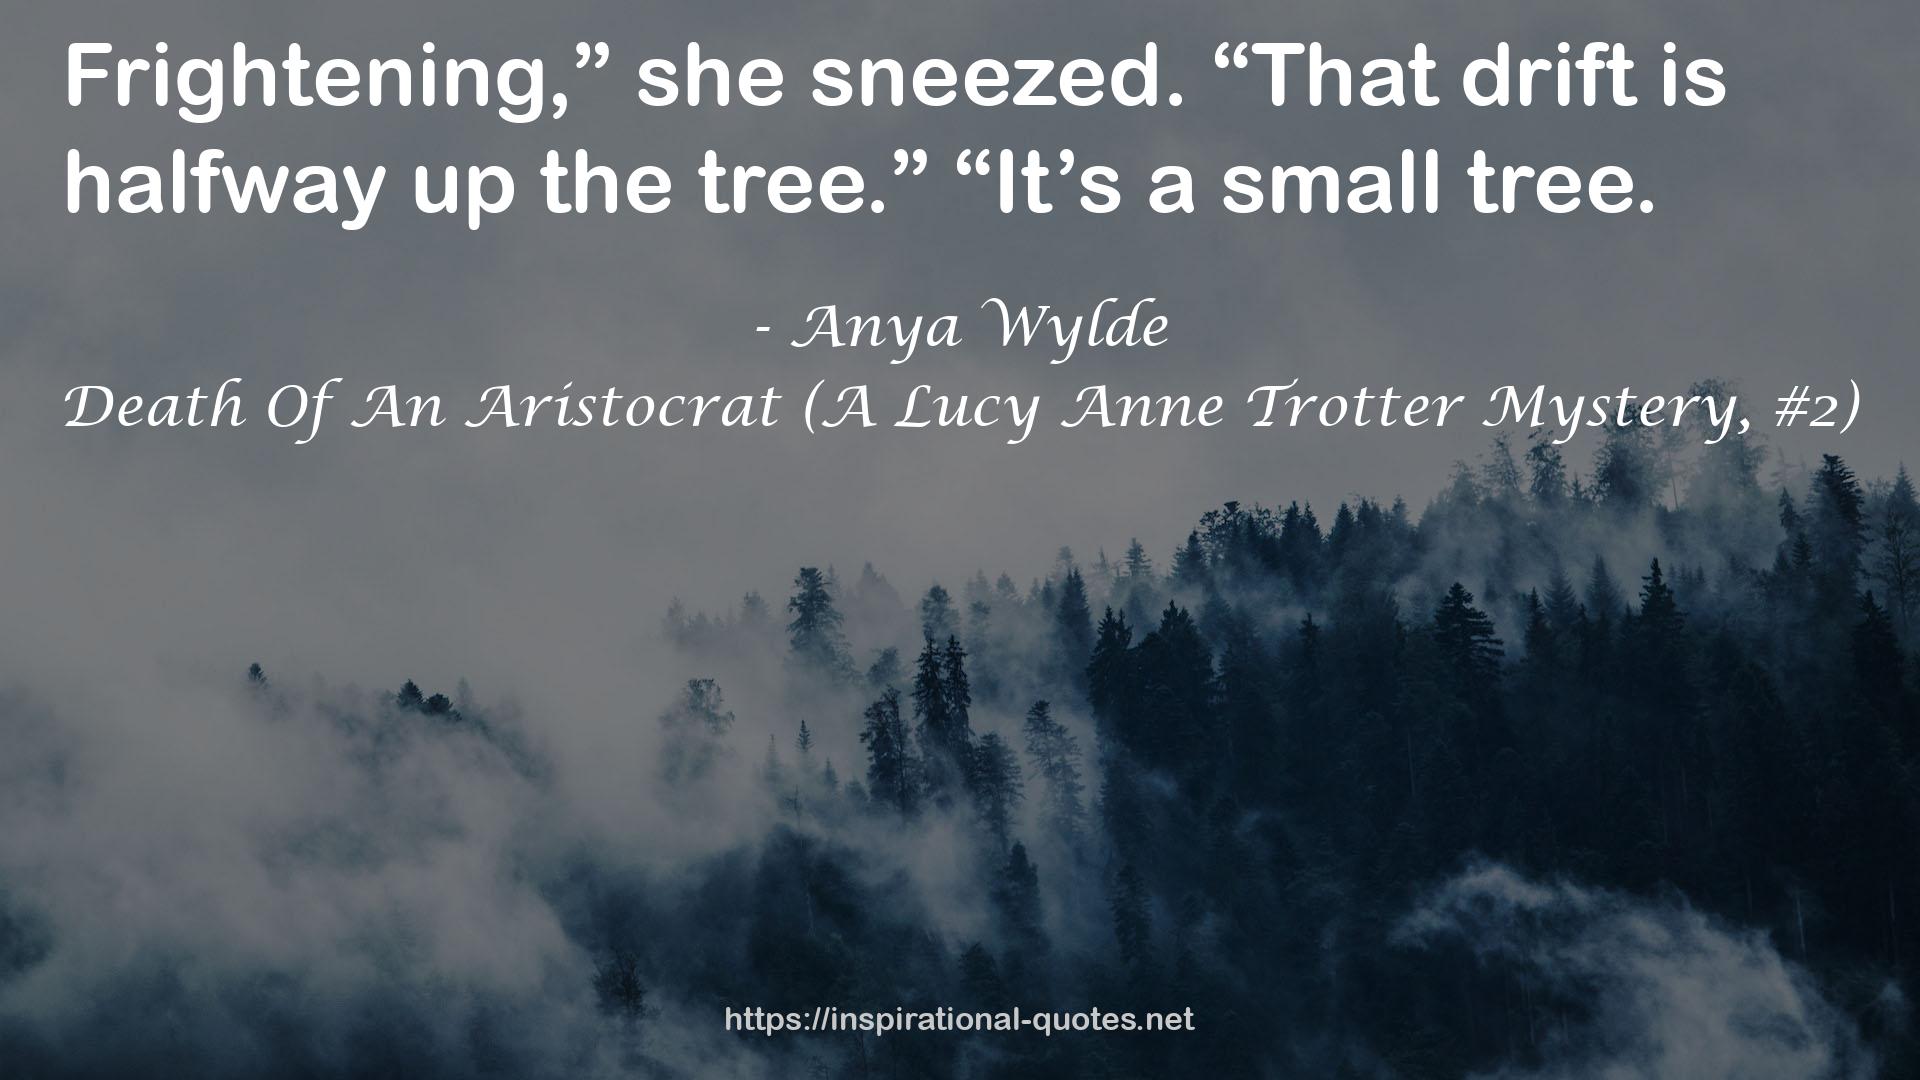 Death Of An Aristocrat (A Lucy Anne Trotter Mystery, #2) QUOTES